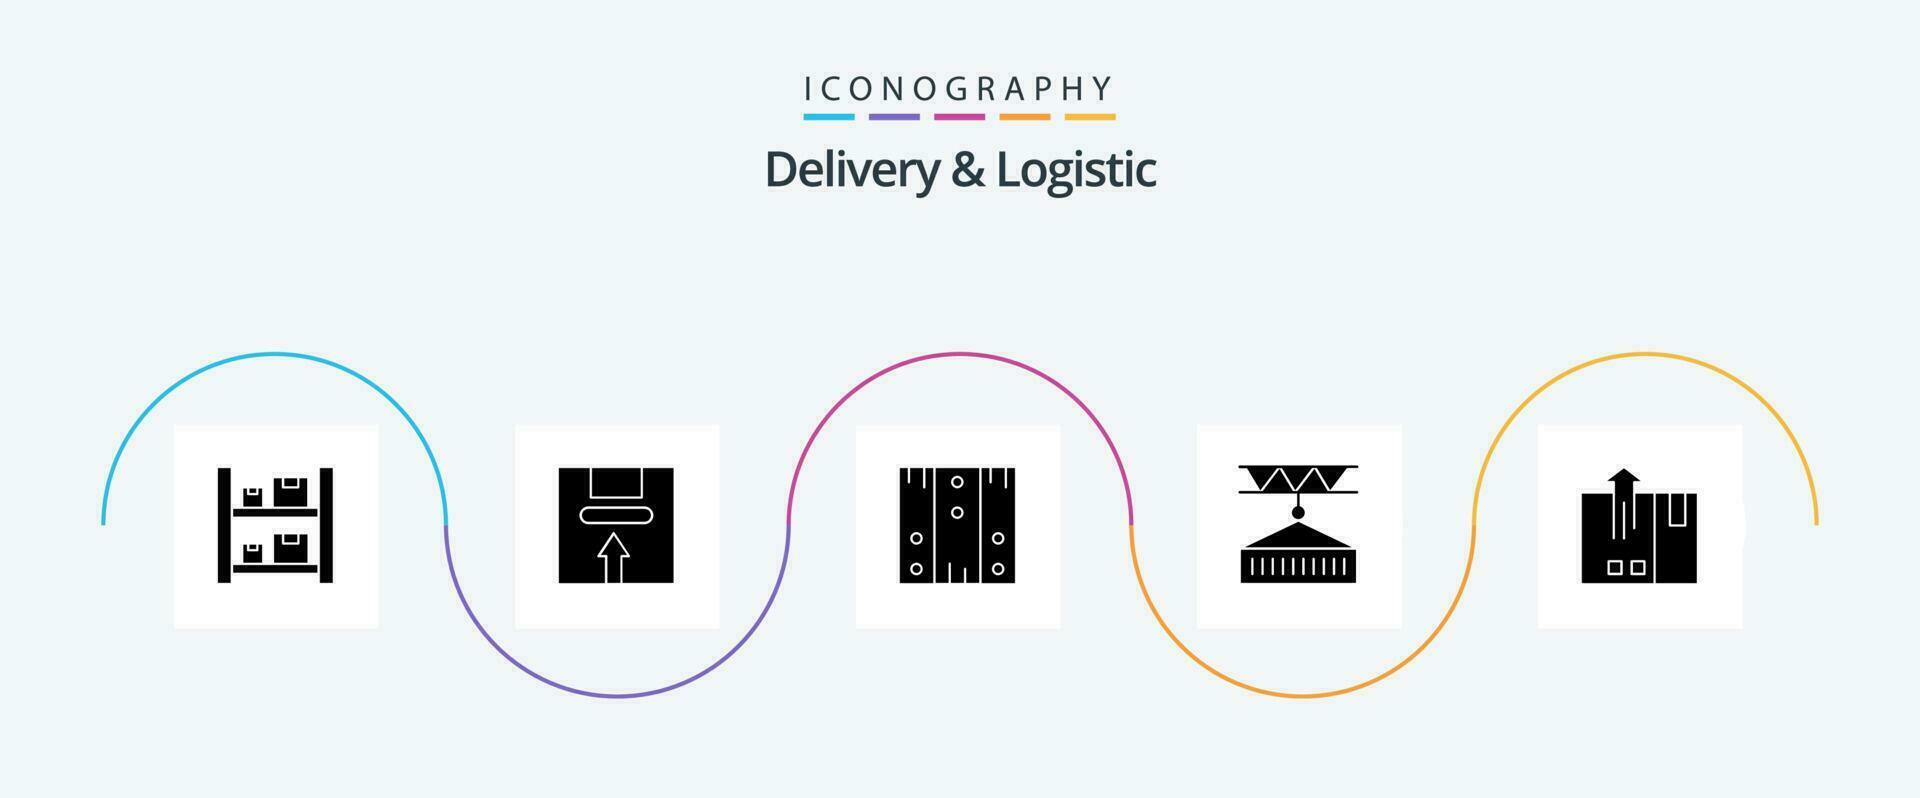 Delivery And Logistic Glyph 5 Icon Pack Including logistic. cargo. logistic. wood. logistic vector